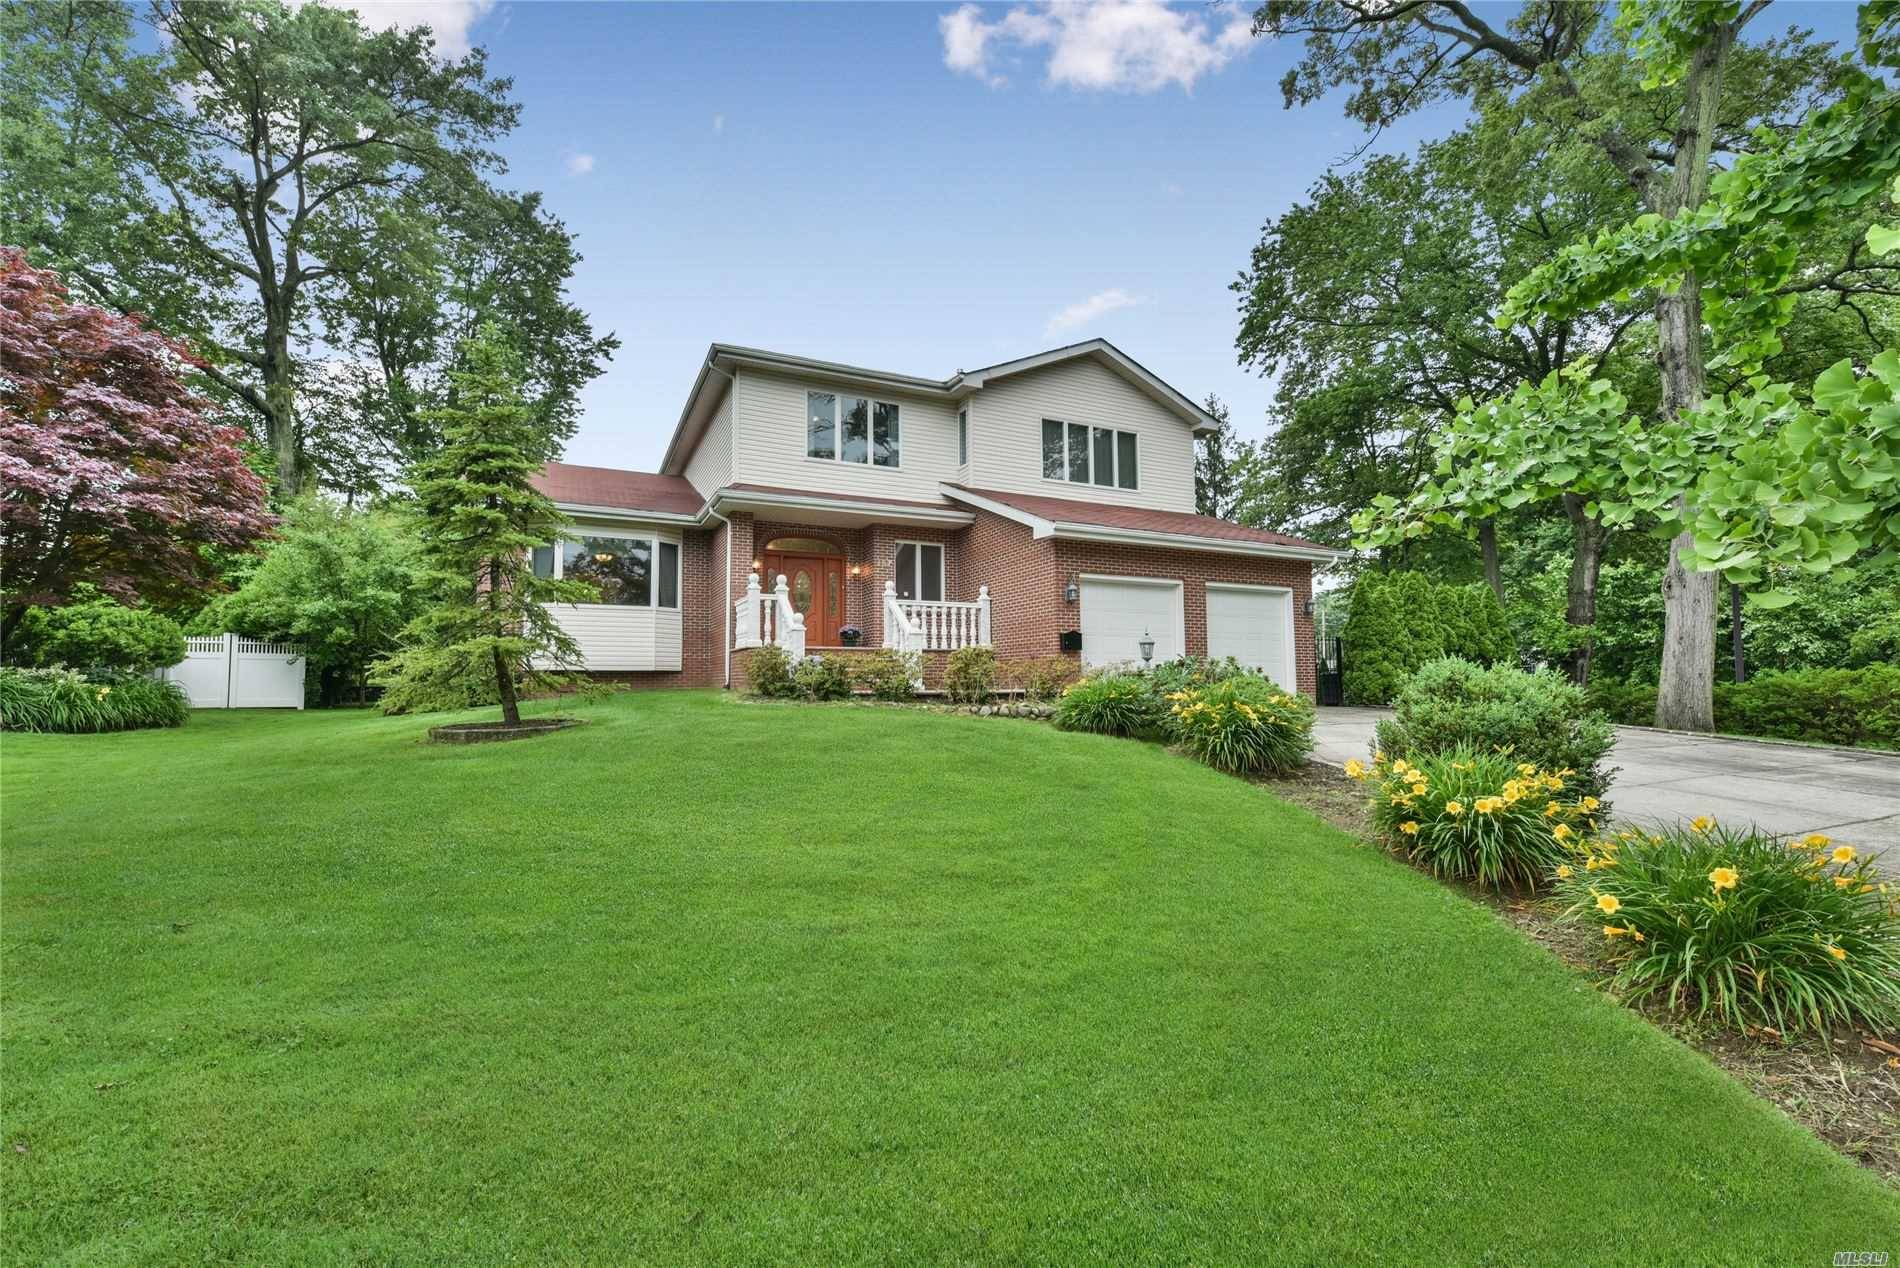 Re Built In 2003 W Quality Materials Fine Workmanship, This Hamilton Park Colonial Offers Many Unique Features incl 10' Ceilings, Canadian Maple Wd Flrs, Custom Spiral Staircases, Custom Built Ins, ...